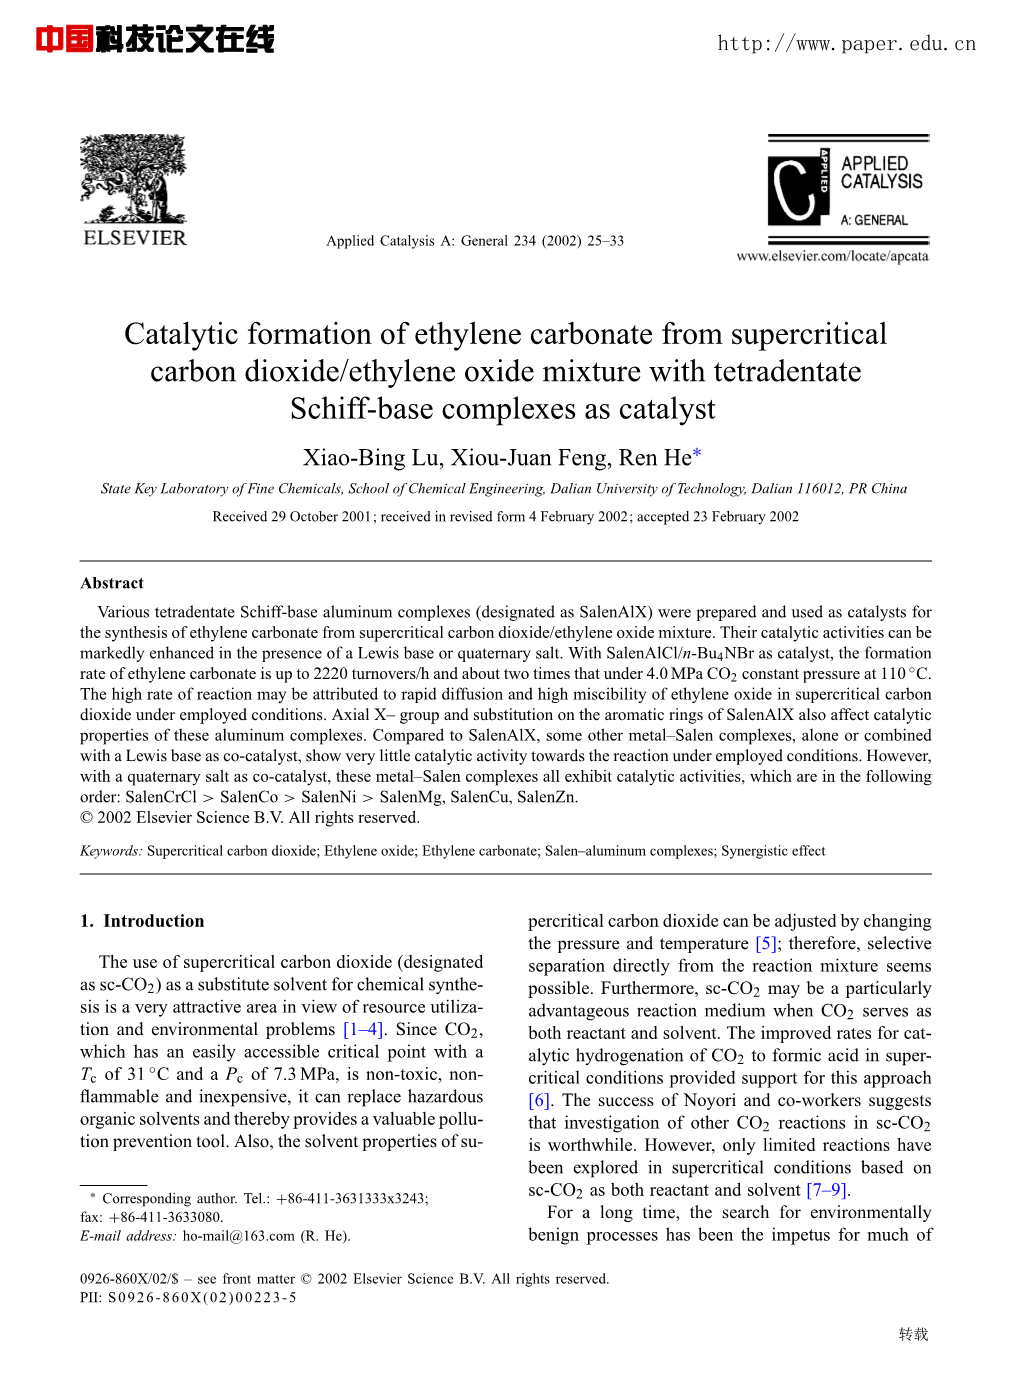 Catalytic Formation of Ethylene Carbonate from Supercritical Carbon